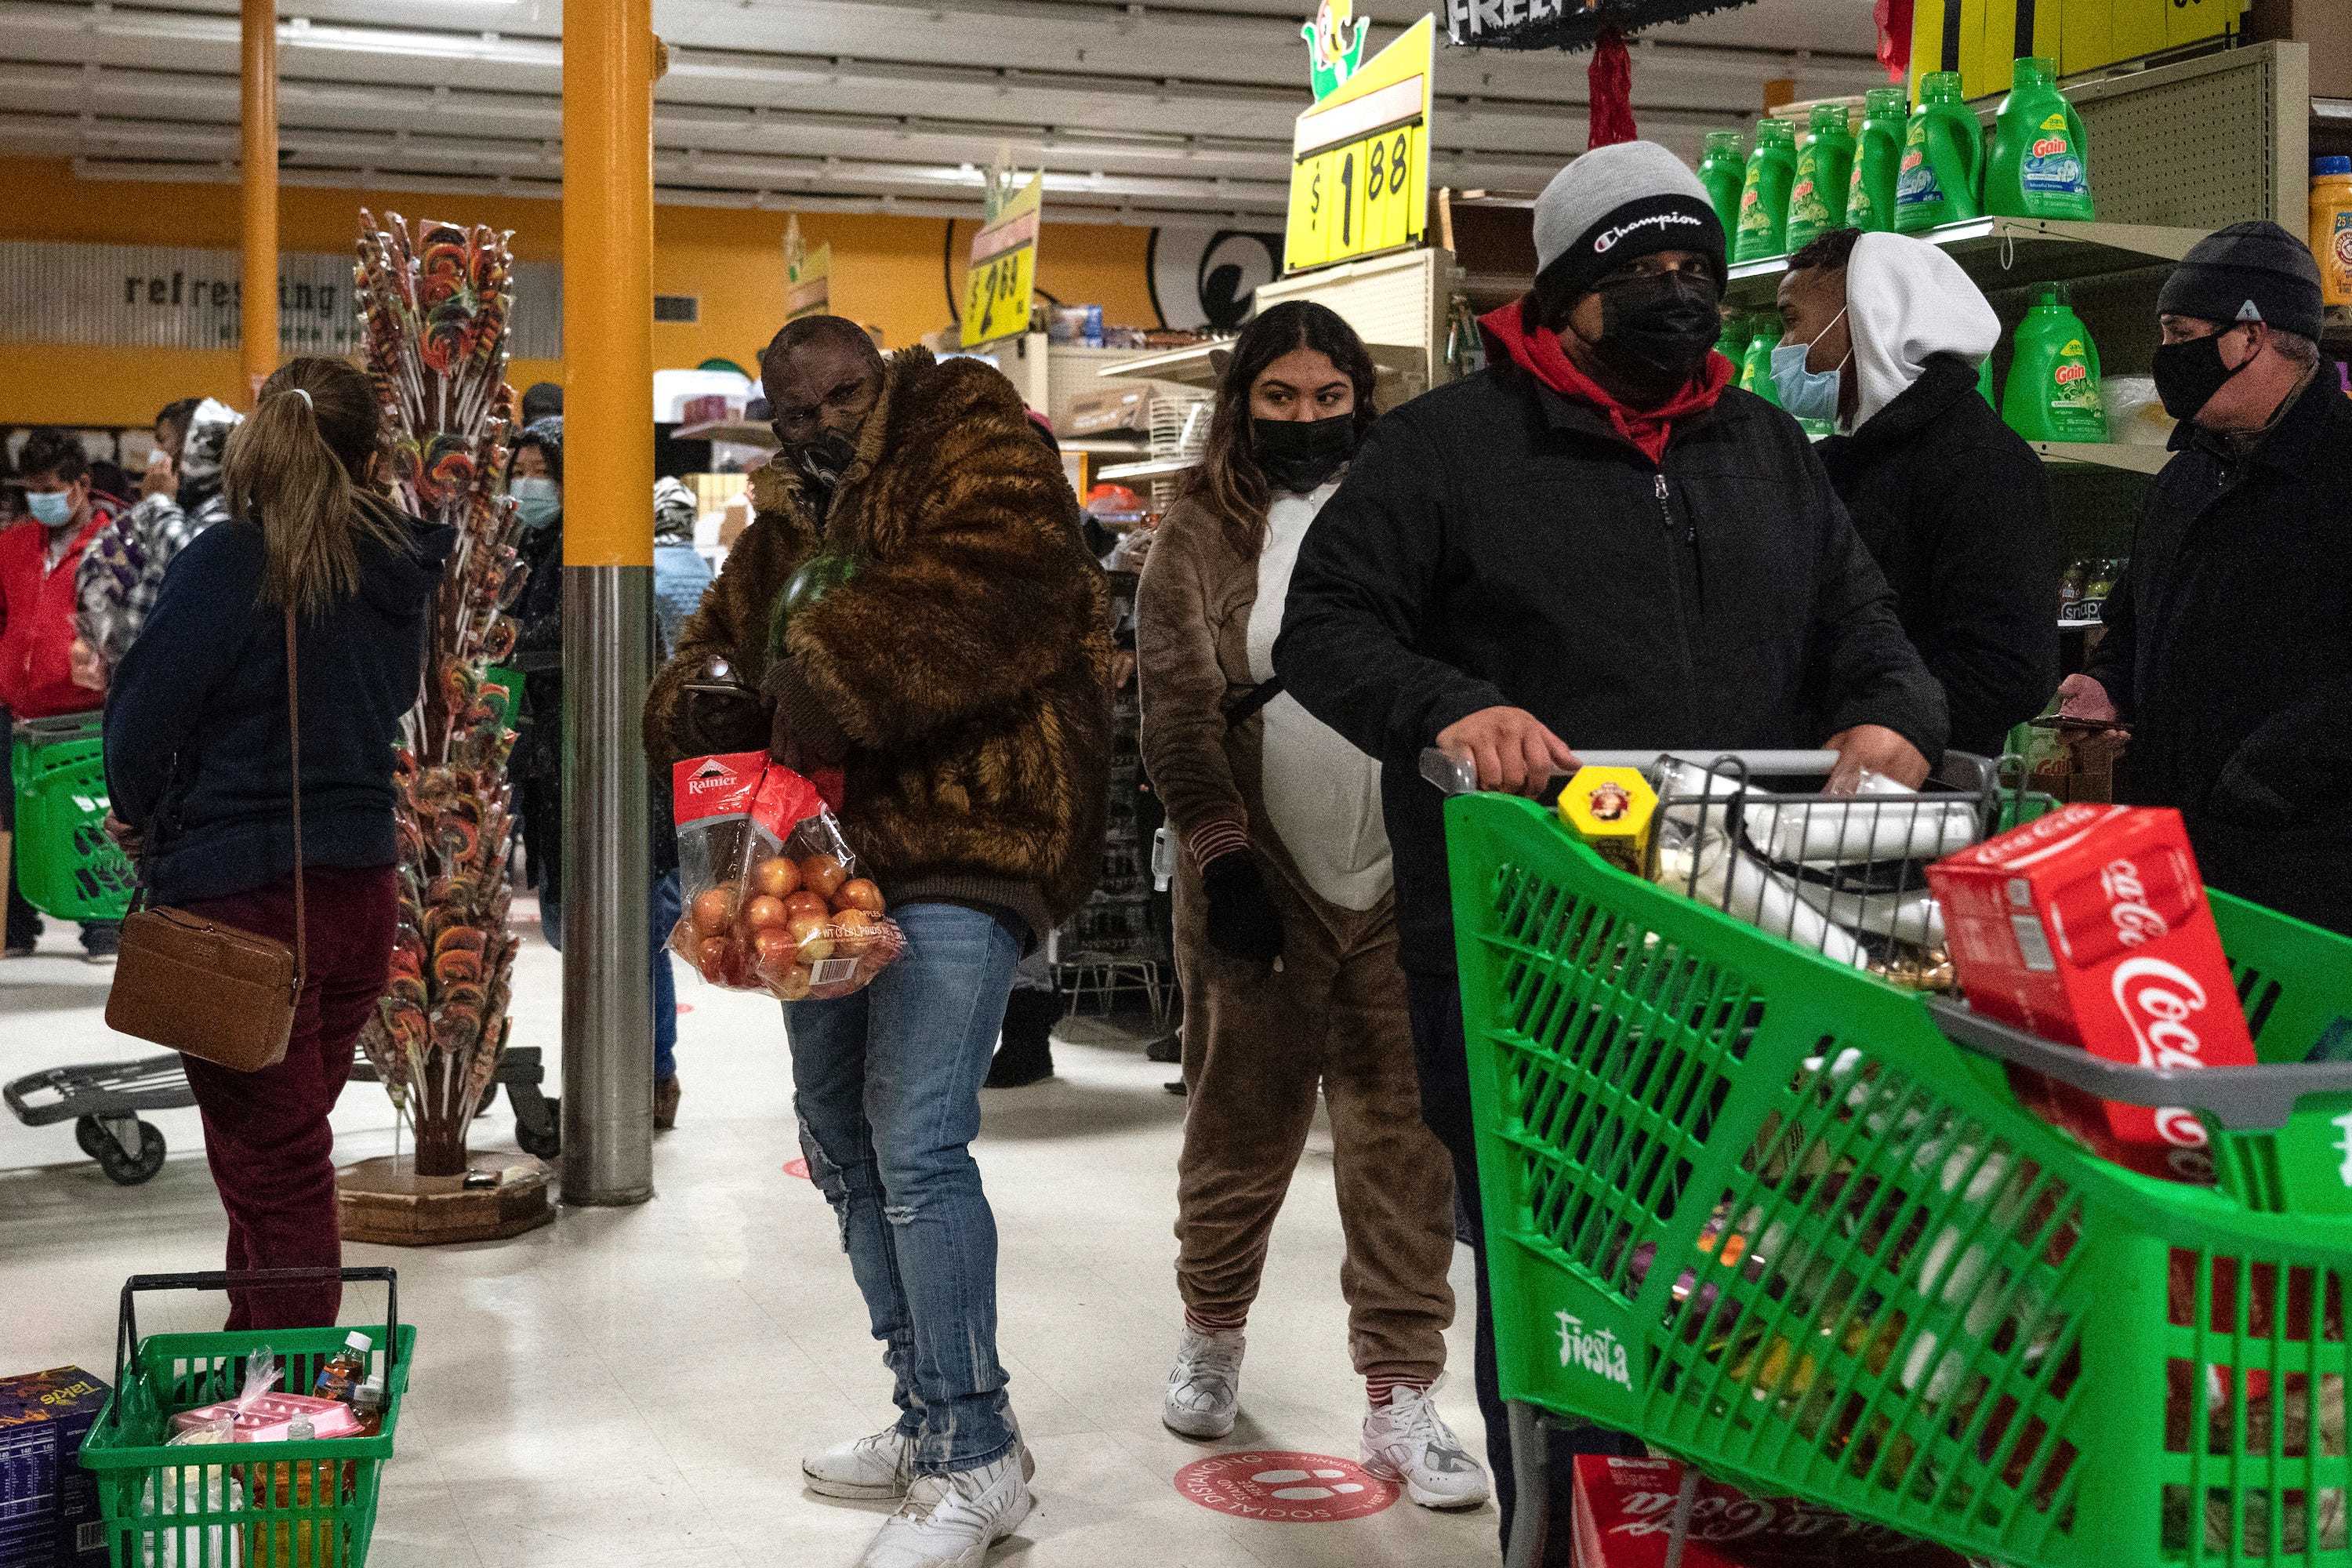 People shop in Fiesta supermarket on February 16, 2021 in Houston, Texas. Winter storm Uri has brought historic cold weather, power outages and traffic accidents to Texas as storms have swept across 26 states with a mix of freezing temperatures and precipitation.